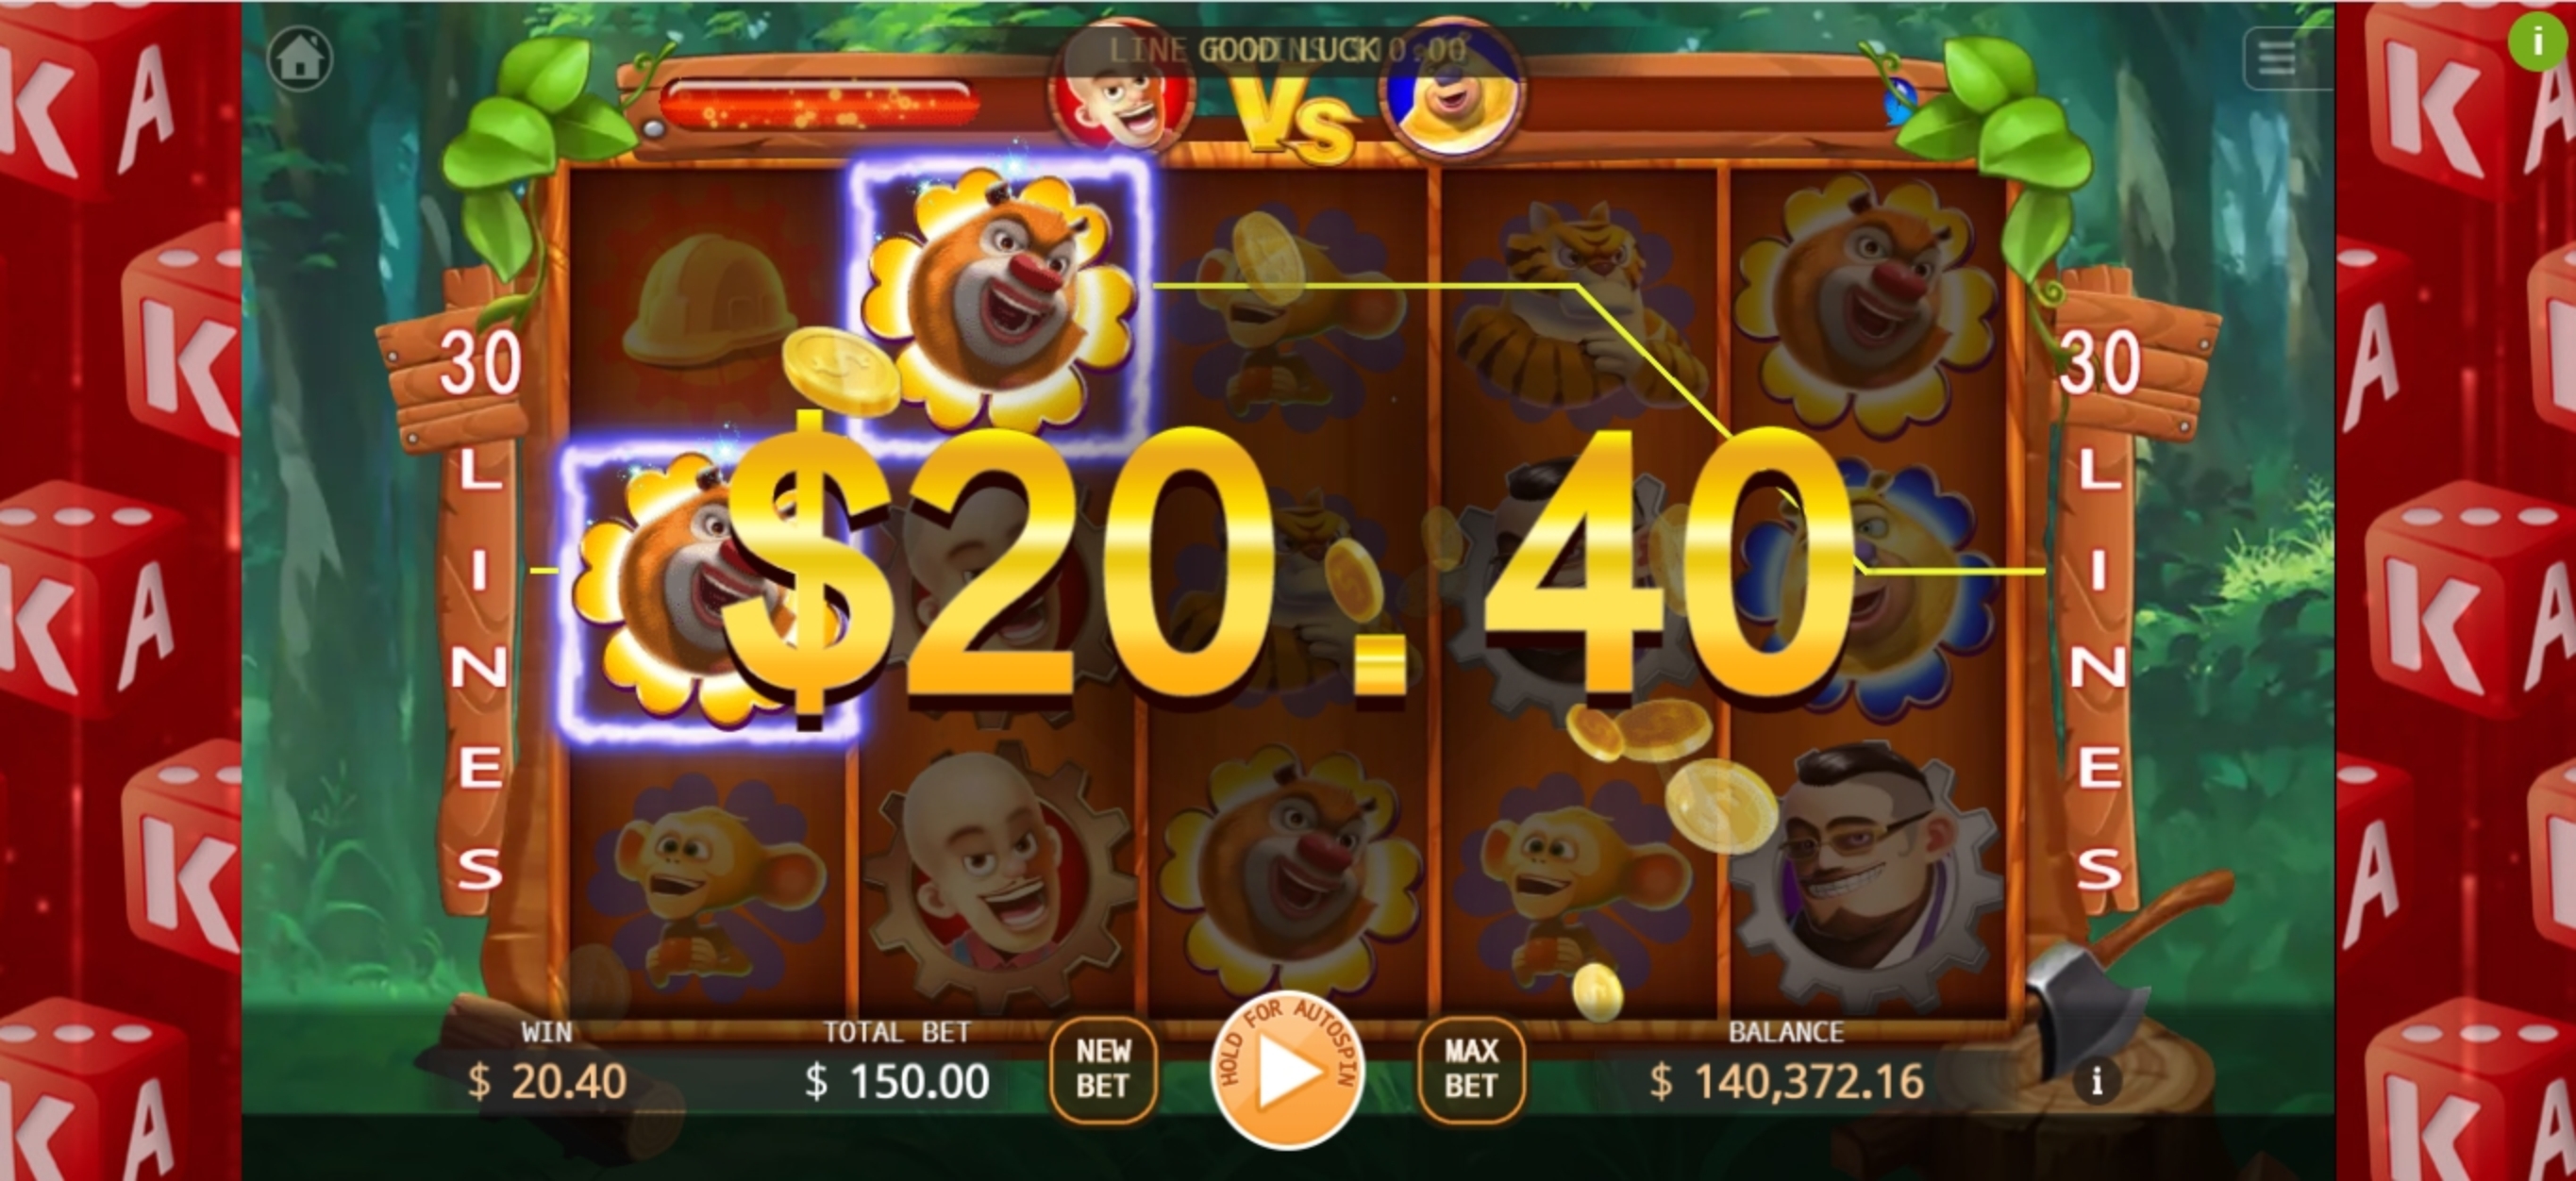 Win Money in Wild Vick Free Slot Game by KA Gaming